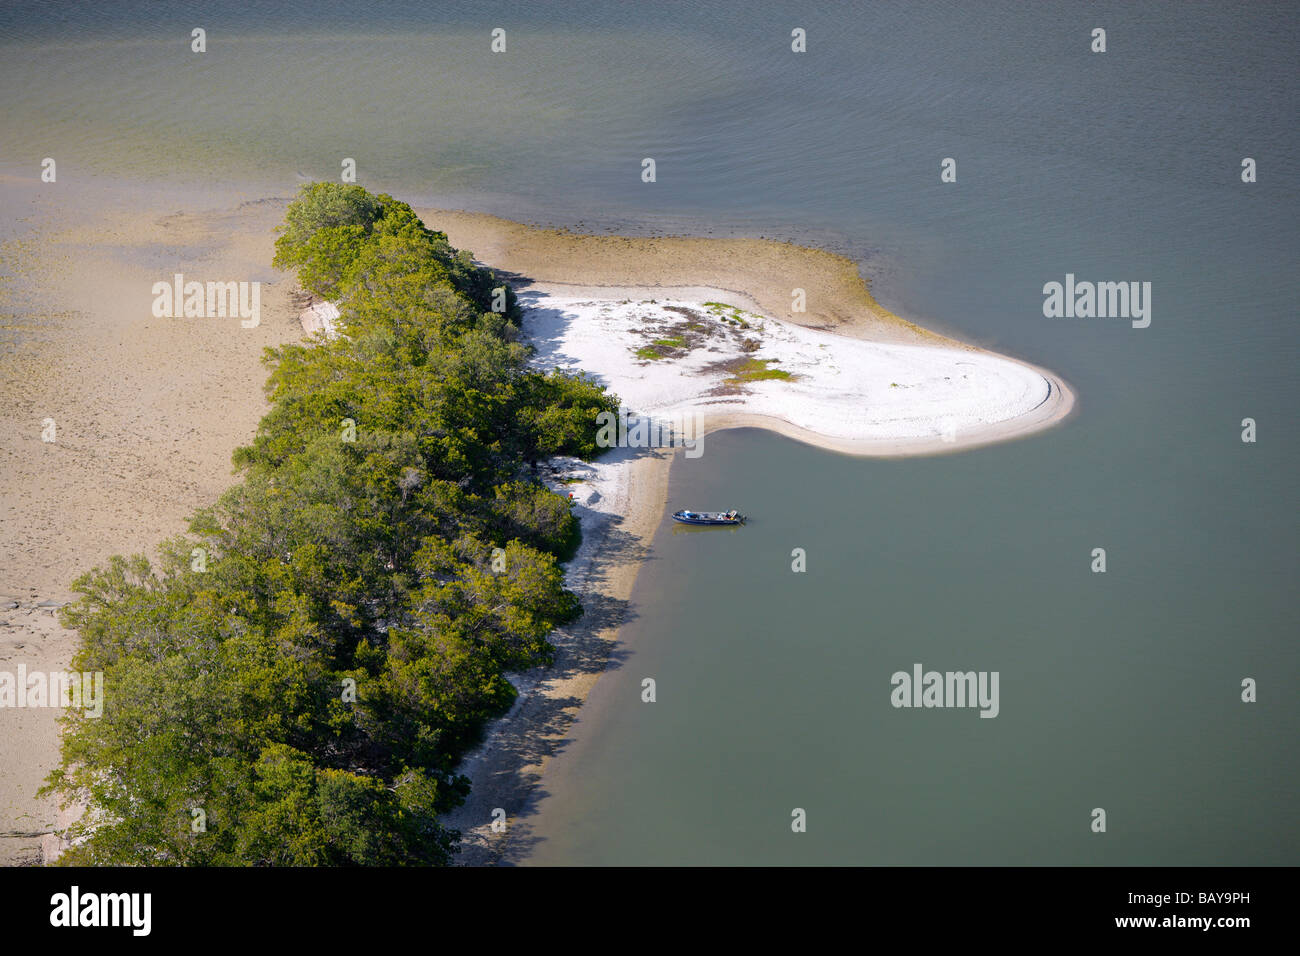 Aerial view of one island in Ten Thousand Islands National Wildlife Refuge, Florida, USA Stock Photo